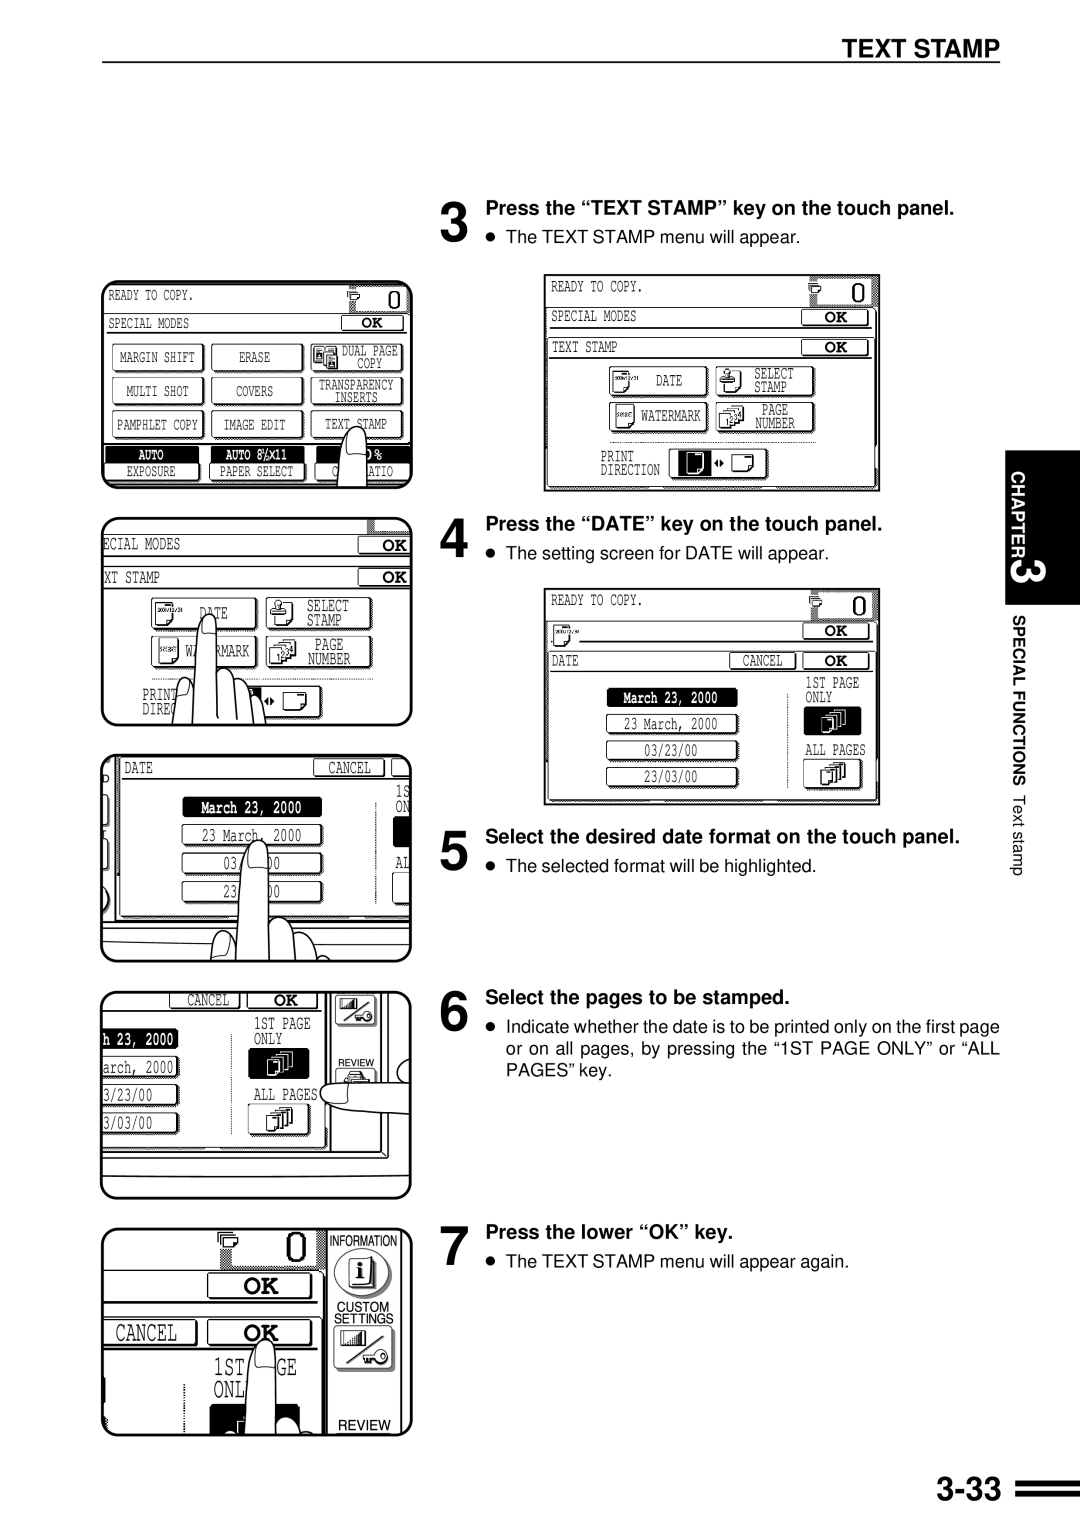 Sharp AR-287 manual 3-33, Cancel Ok, Press the “TEXT STAMP” key on the touch panel, Select the pages to be stamped 